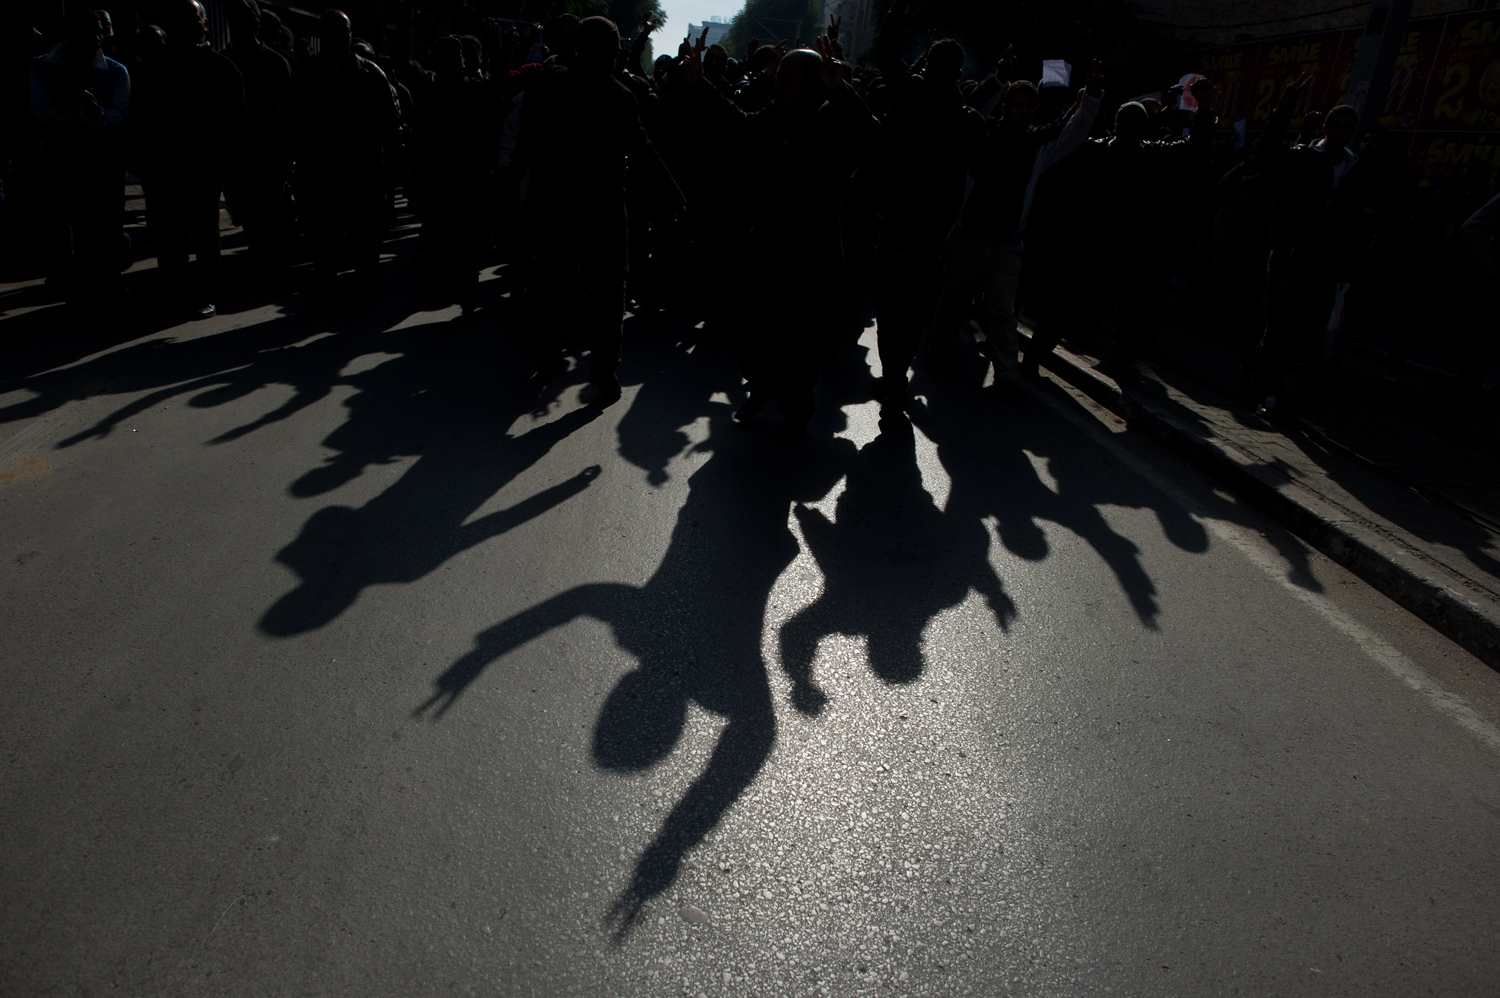 Jan. 17, 2011. Tunisian protesters on the streets of Tunis, chanting slogans and facing off against police forces.